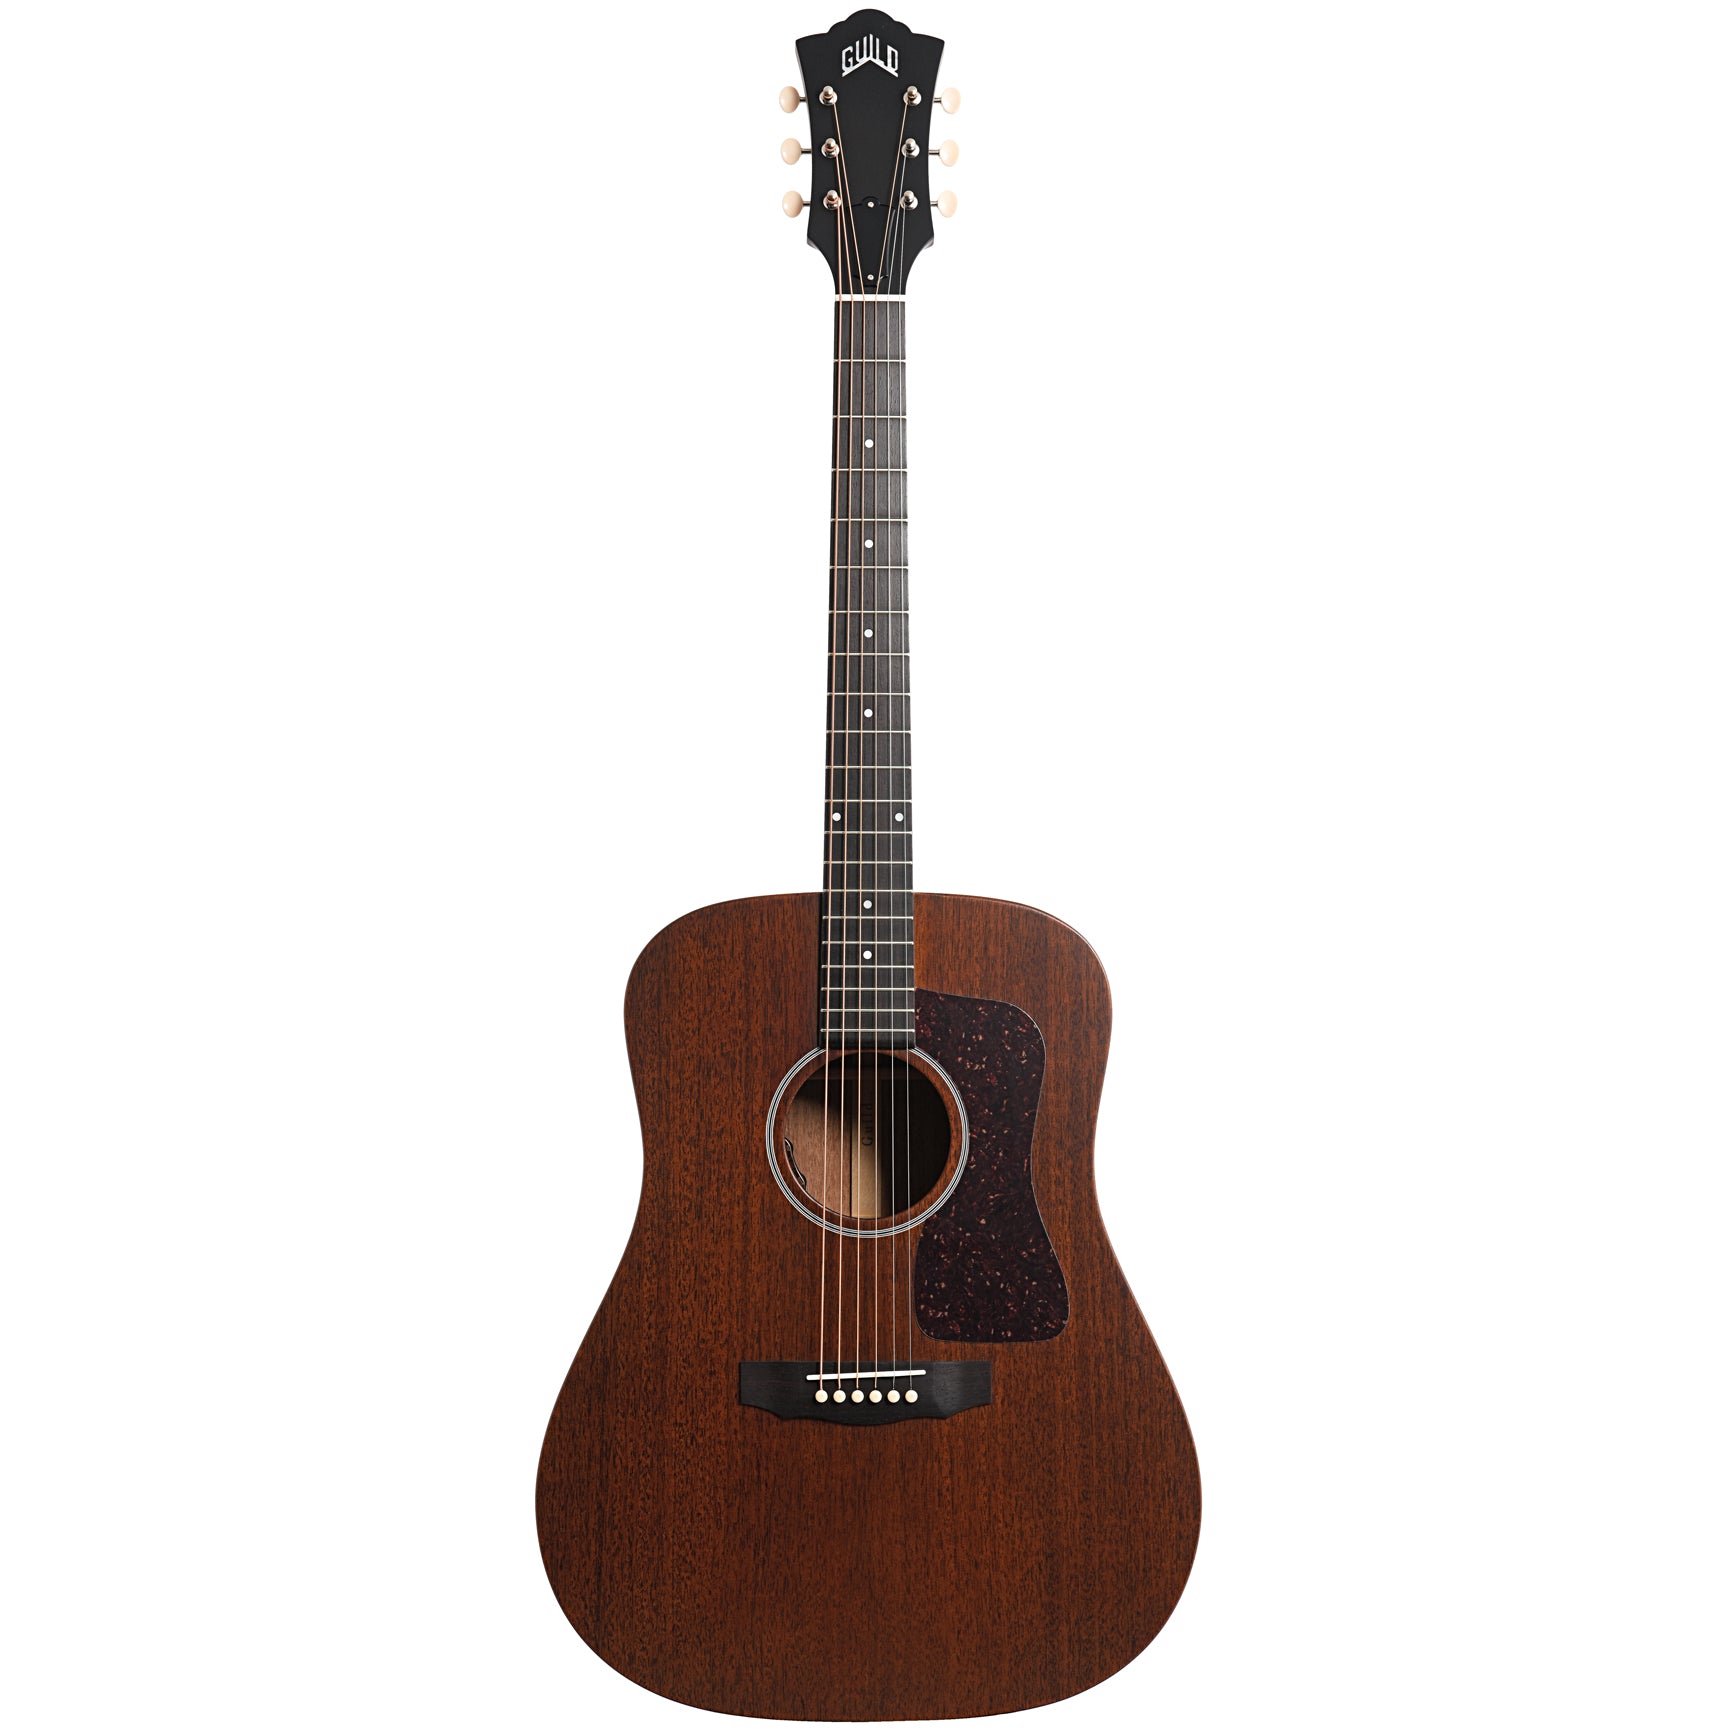 Image 2 of Guild USA D-20E Acoustic Guitar with Pickup & Case - SKU# GUID20E : Product Type Flat-top Guitars : Elderly Instruments